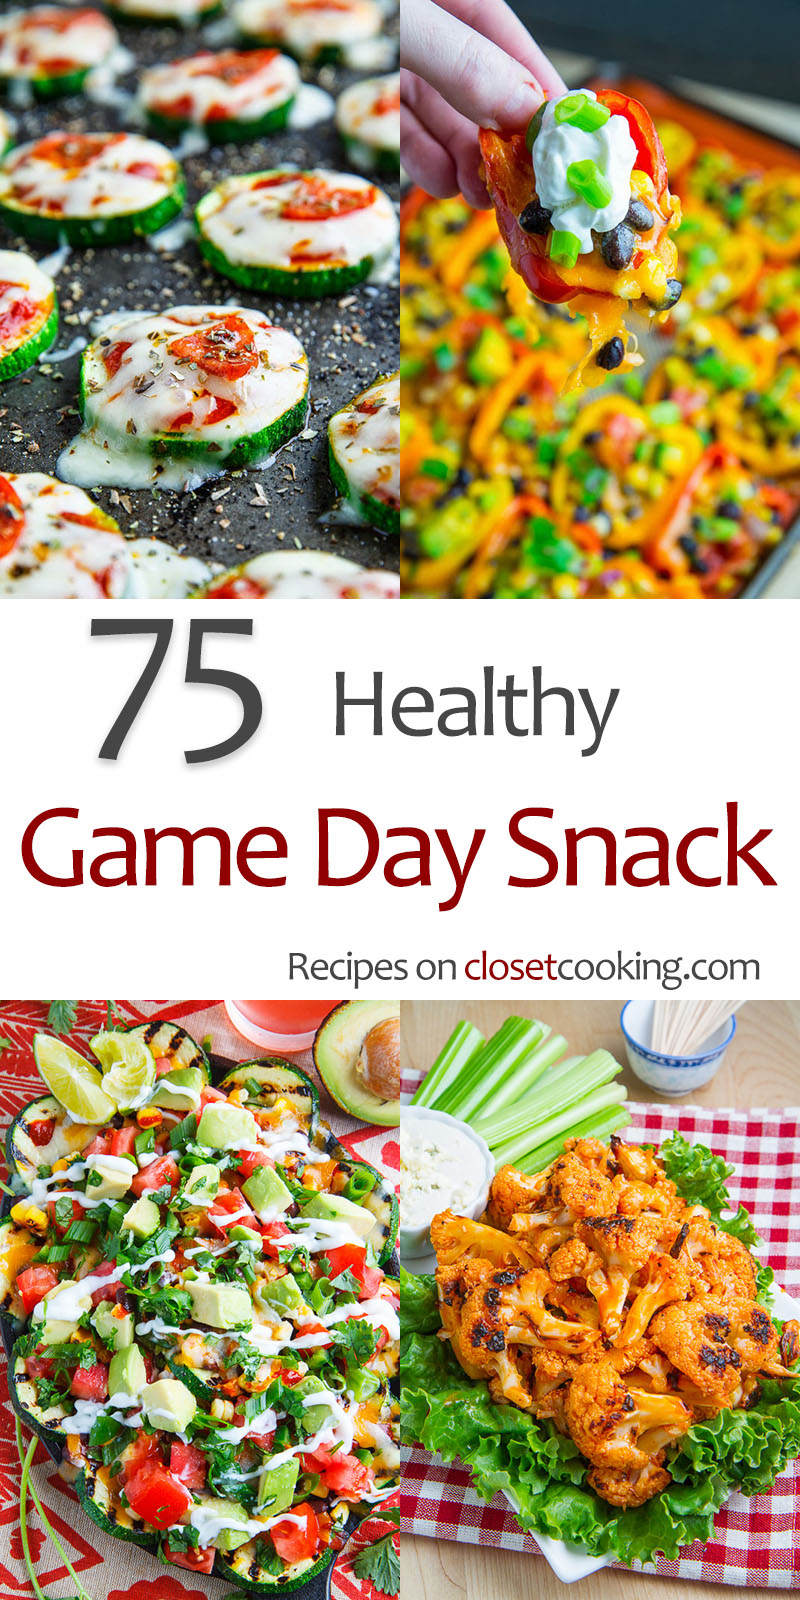 https://www.closetcooking.com/wp-content/uploads/2018/01/75-Healthy-Game-Day-Snack-Recipes.jpg